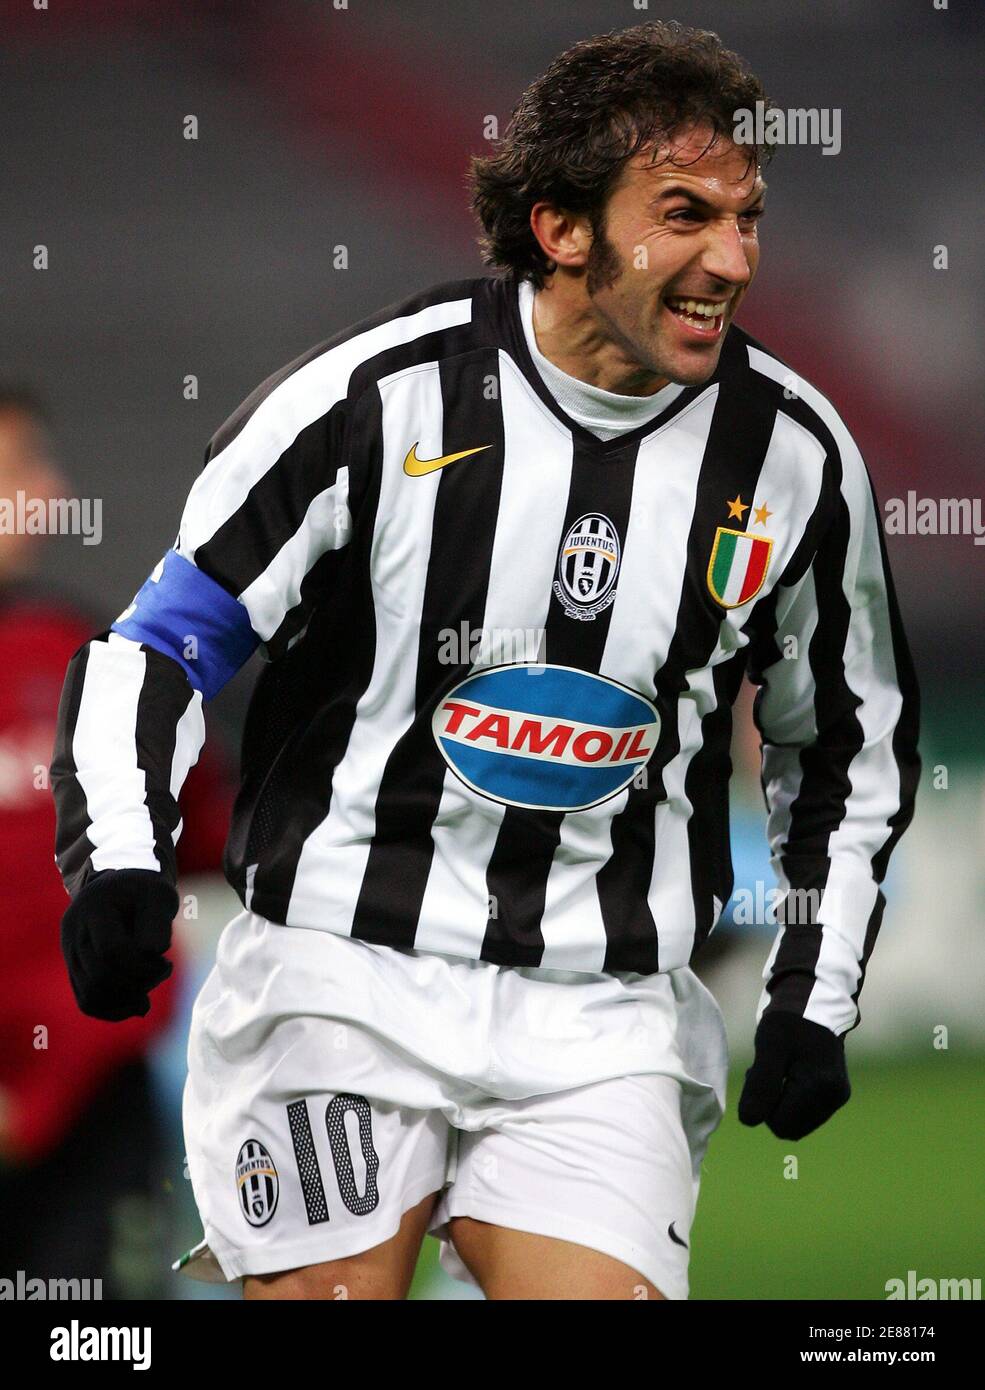 Juventus' Alessandro Del Piero celebrates his goal against Club Brugge  during their UEFA Champions League Group A soccer match at Delle Alpi  stadium in Turin, northern Italy, November 22, 2005. REUTERS/Daniele La